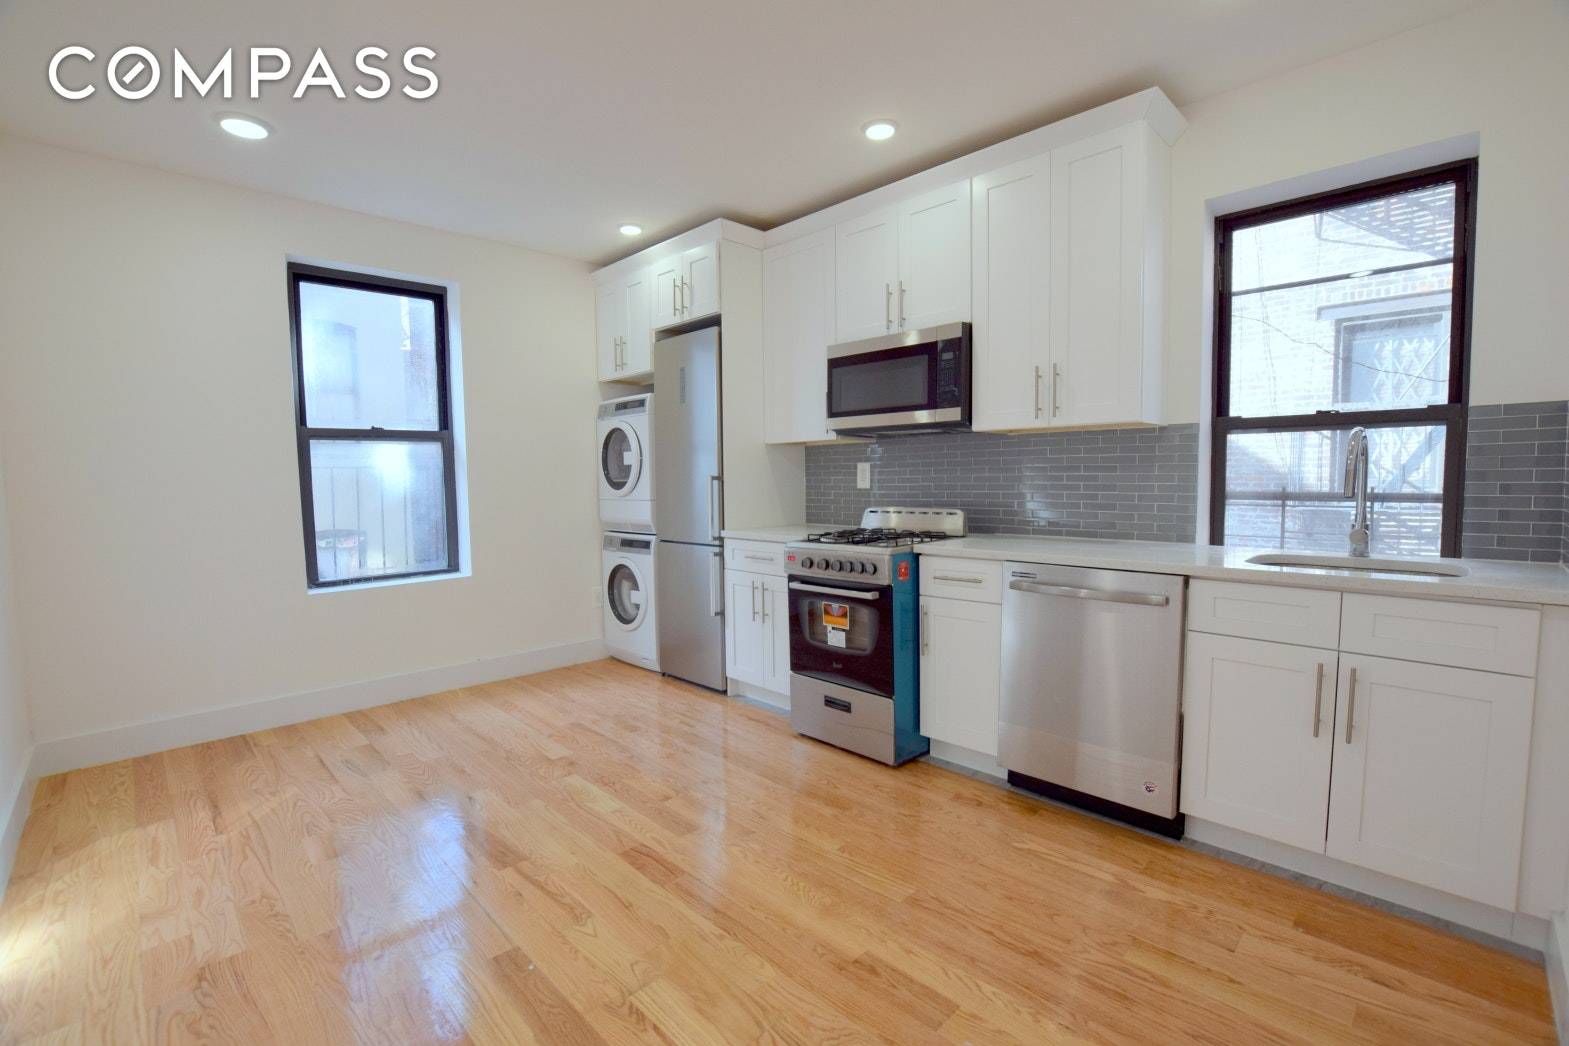 Be the FIRST to live in this Brand New renovated 3 bedroom with WASHER DRYER in unit !